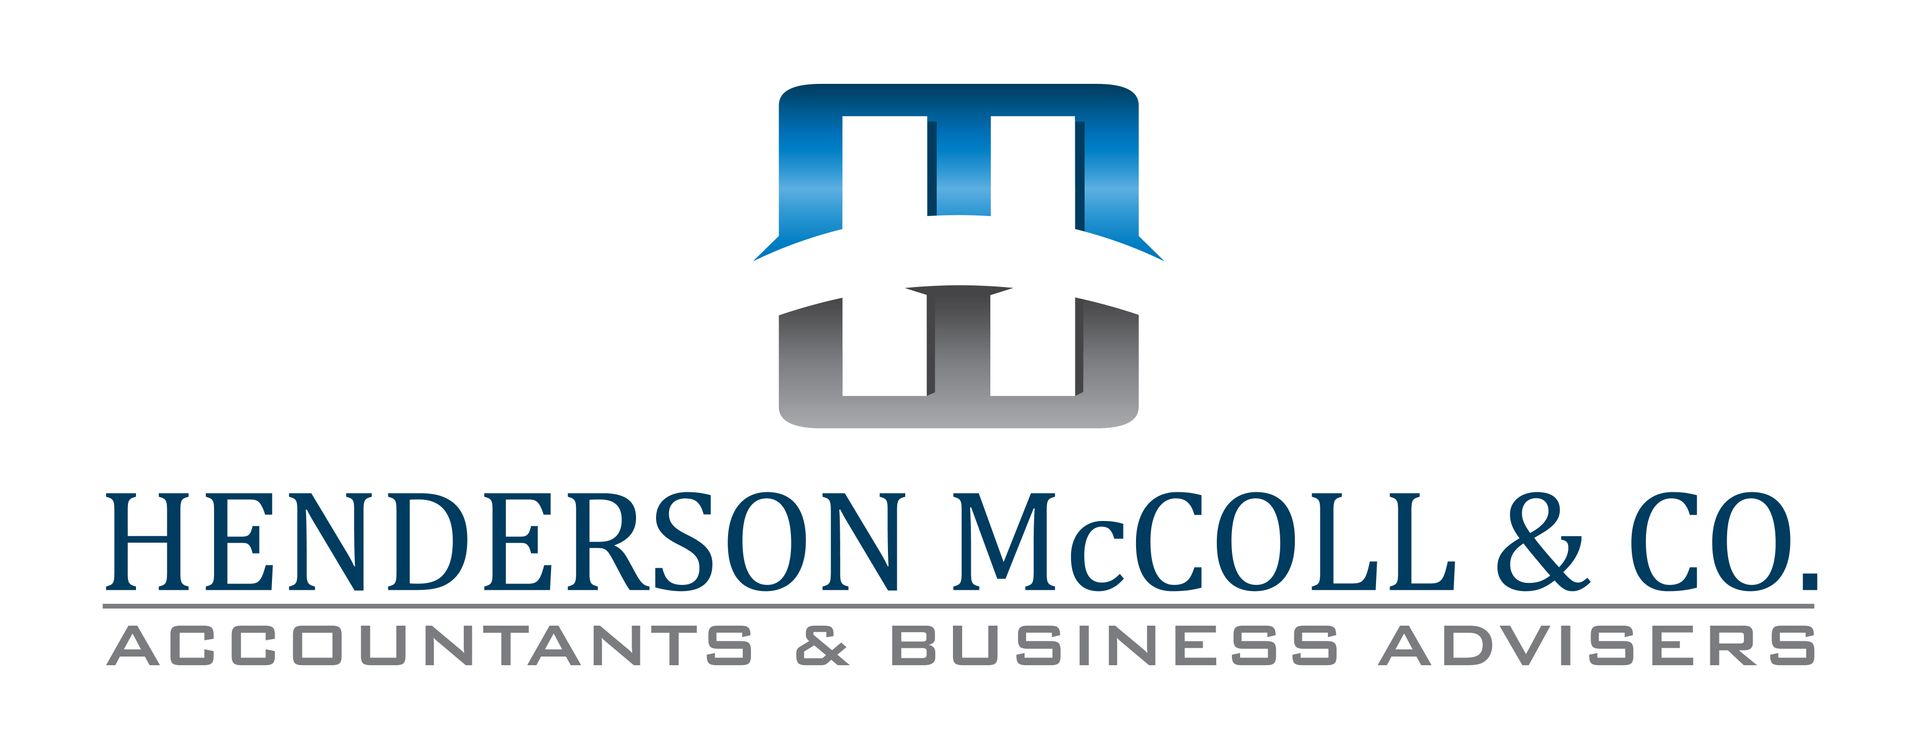 Henderson McColl & Co. Accountants & Business Advisers: Personal & Business Accounting in Dubbo